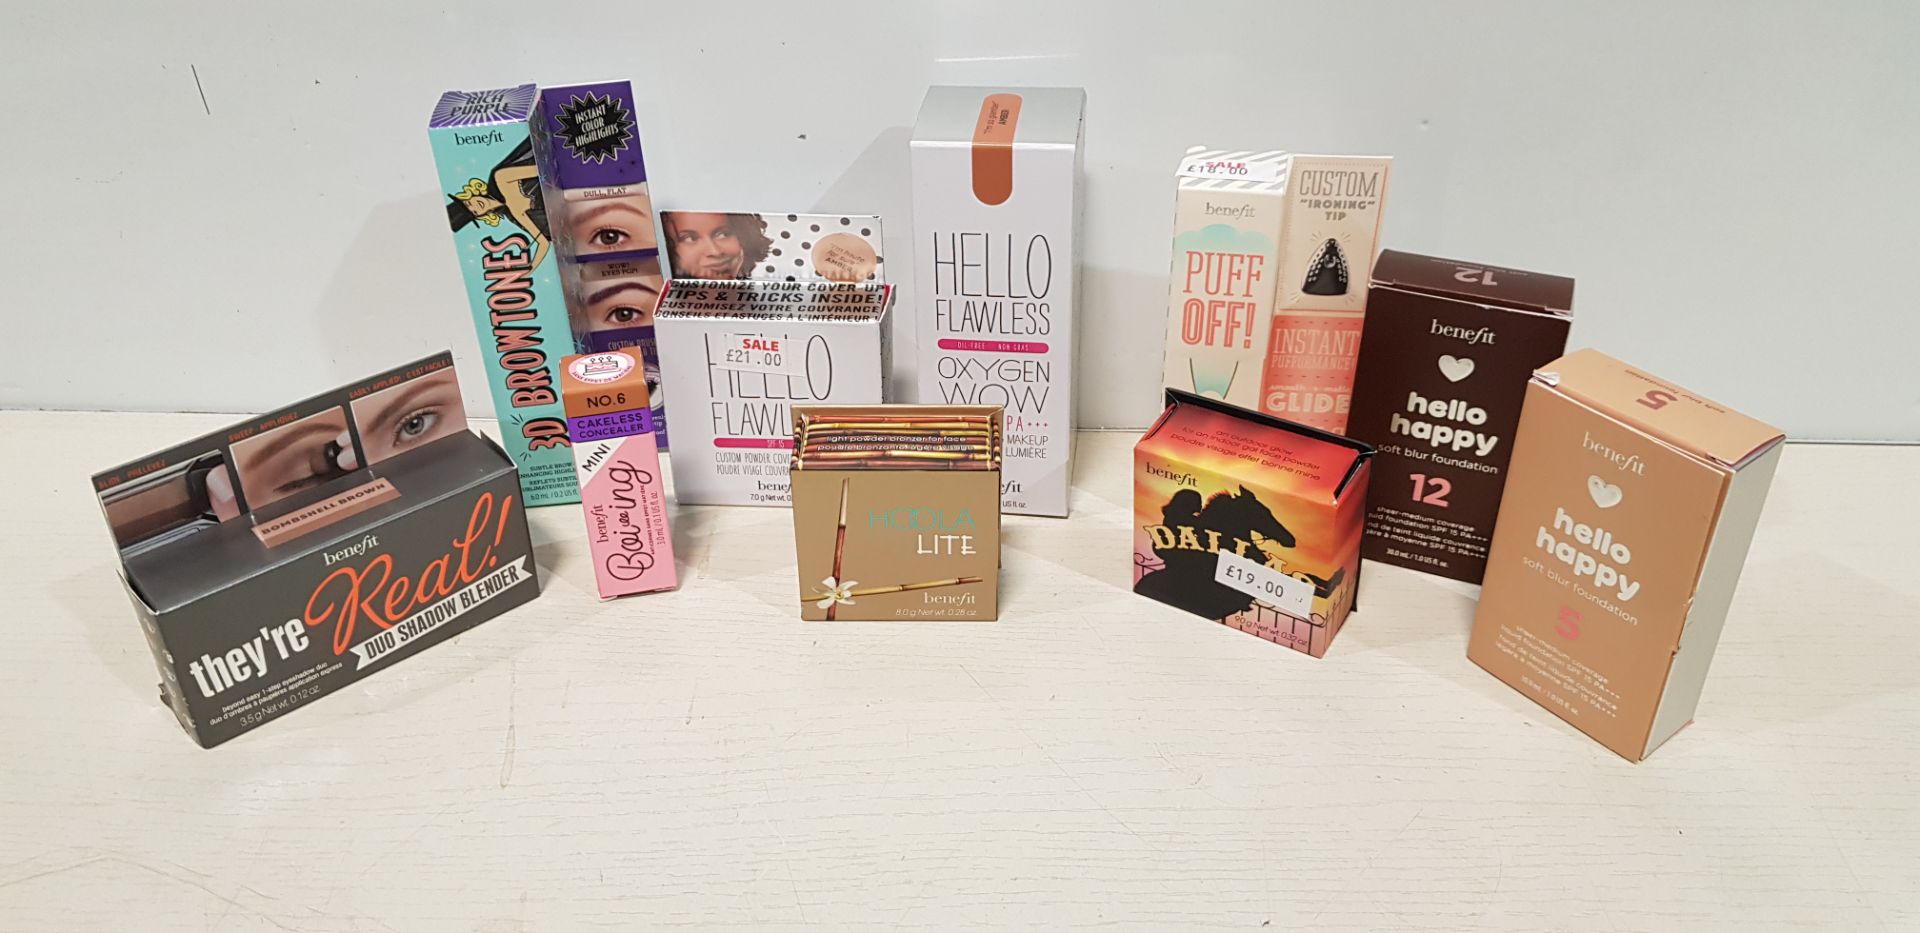 10 PIECE BRAND NEW MIXED BENEFIT MAKE UP LOT CONTAINING PUFFOFF UNDEREYE GEL / HOOLA LIGHT